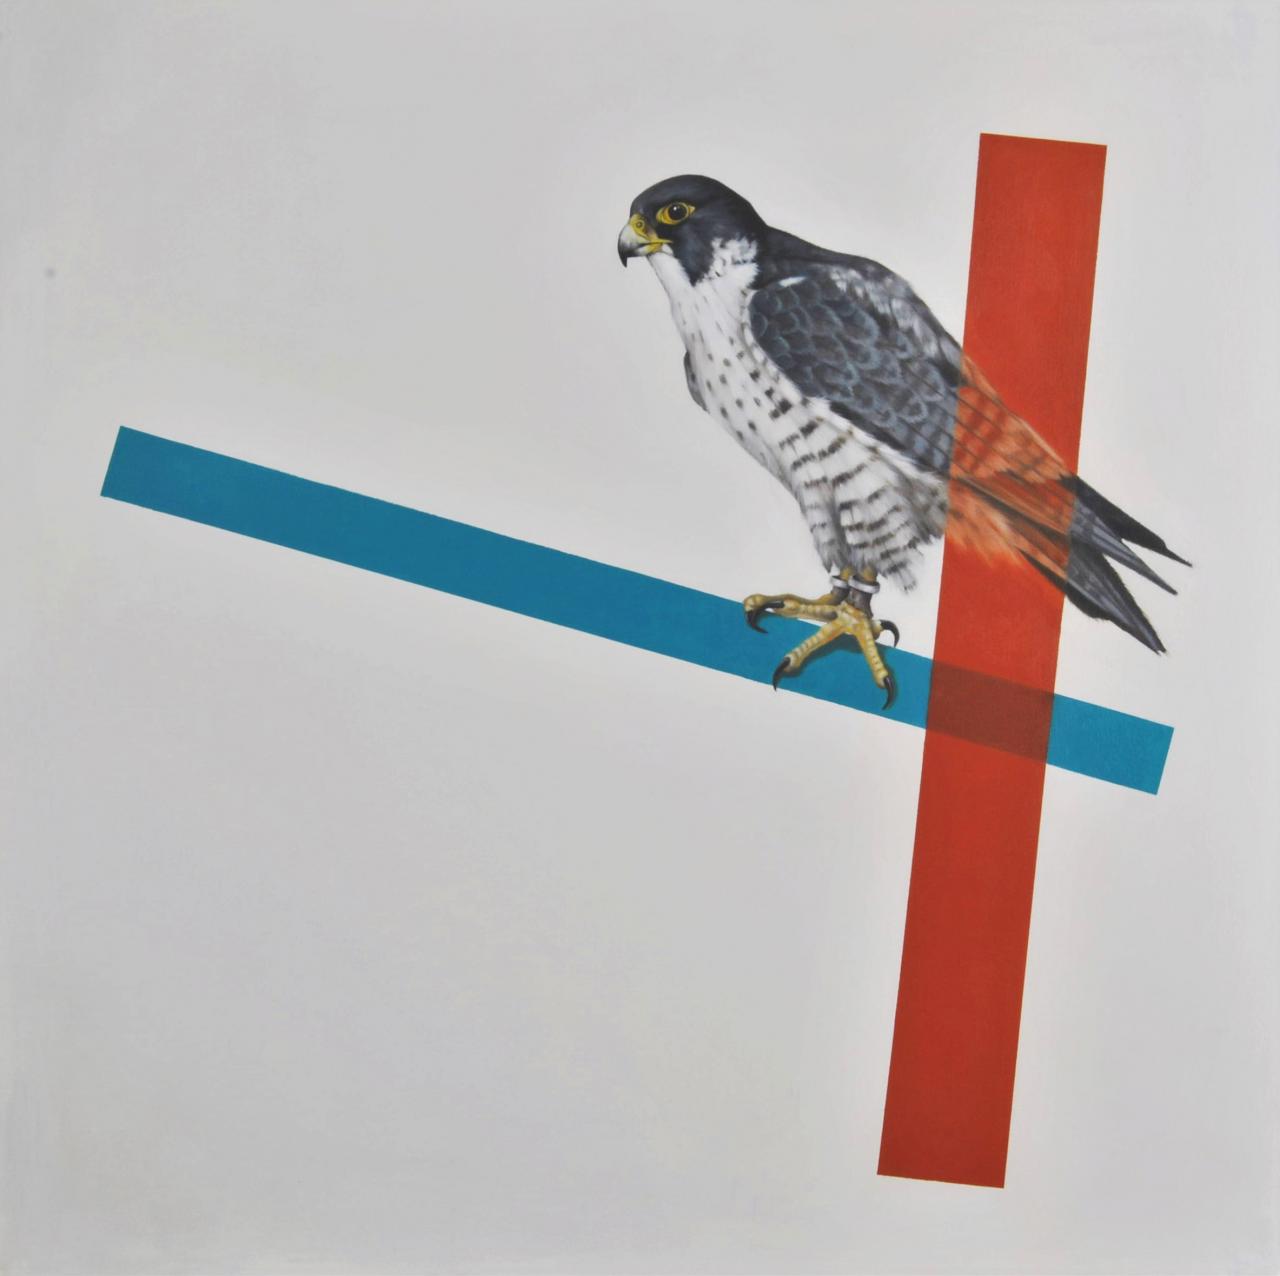 Nick Rooney painting, the spy, brown and white hawk perched on slanted blue rectangle with red rectangle running up and down. 